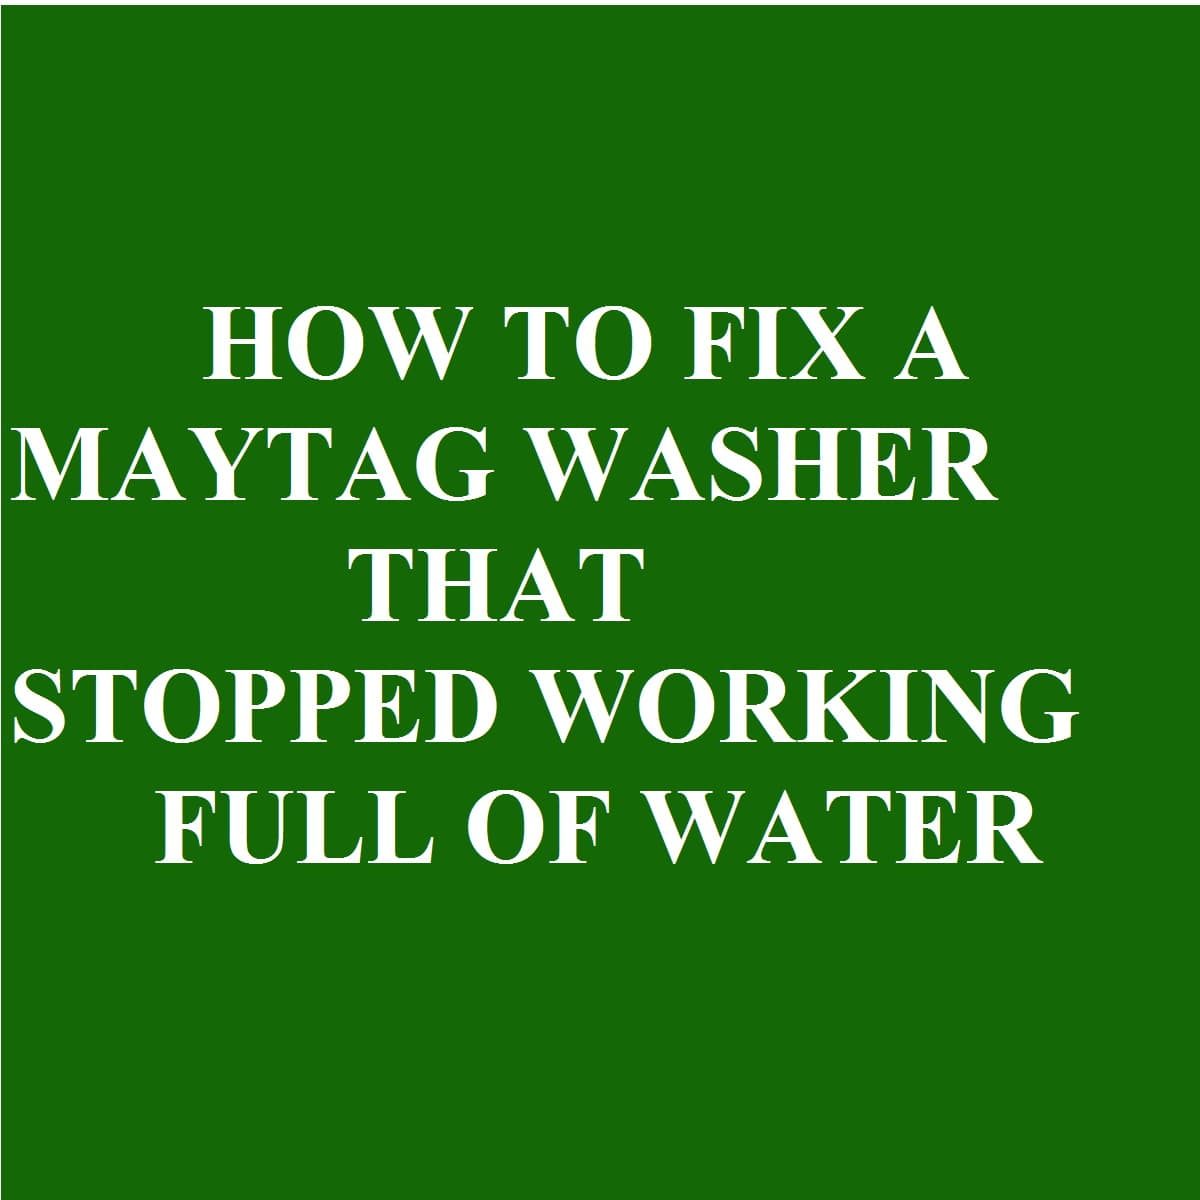 Maytag washer stopped working full of water